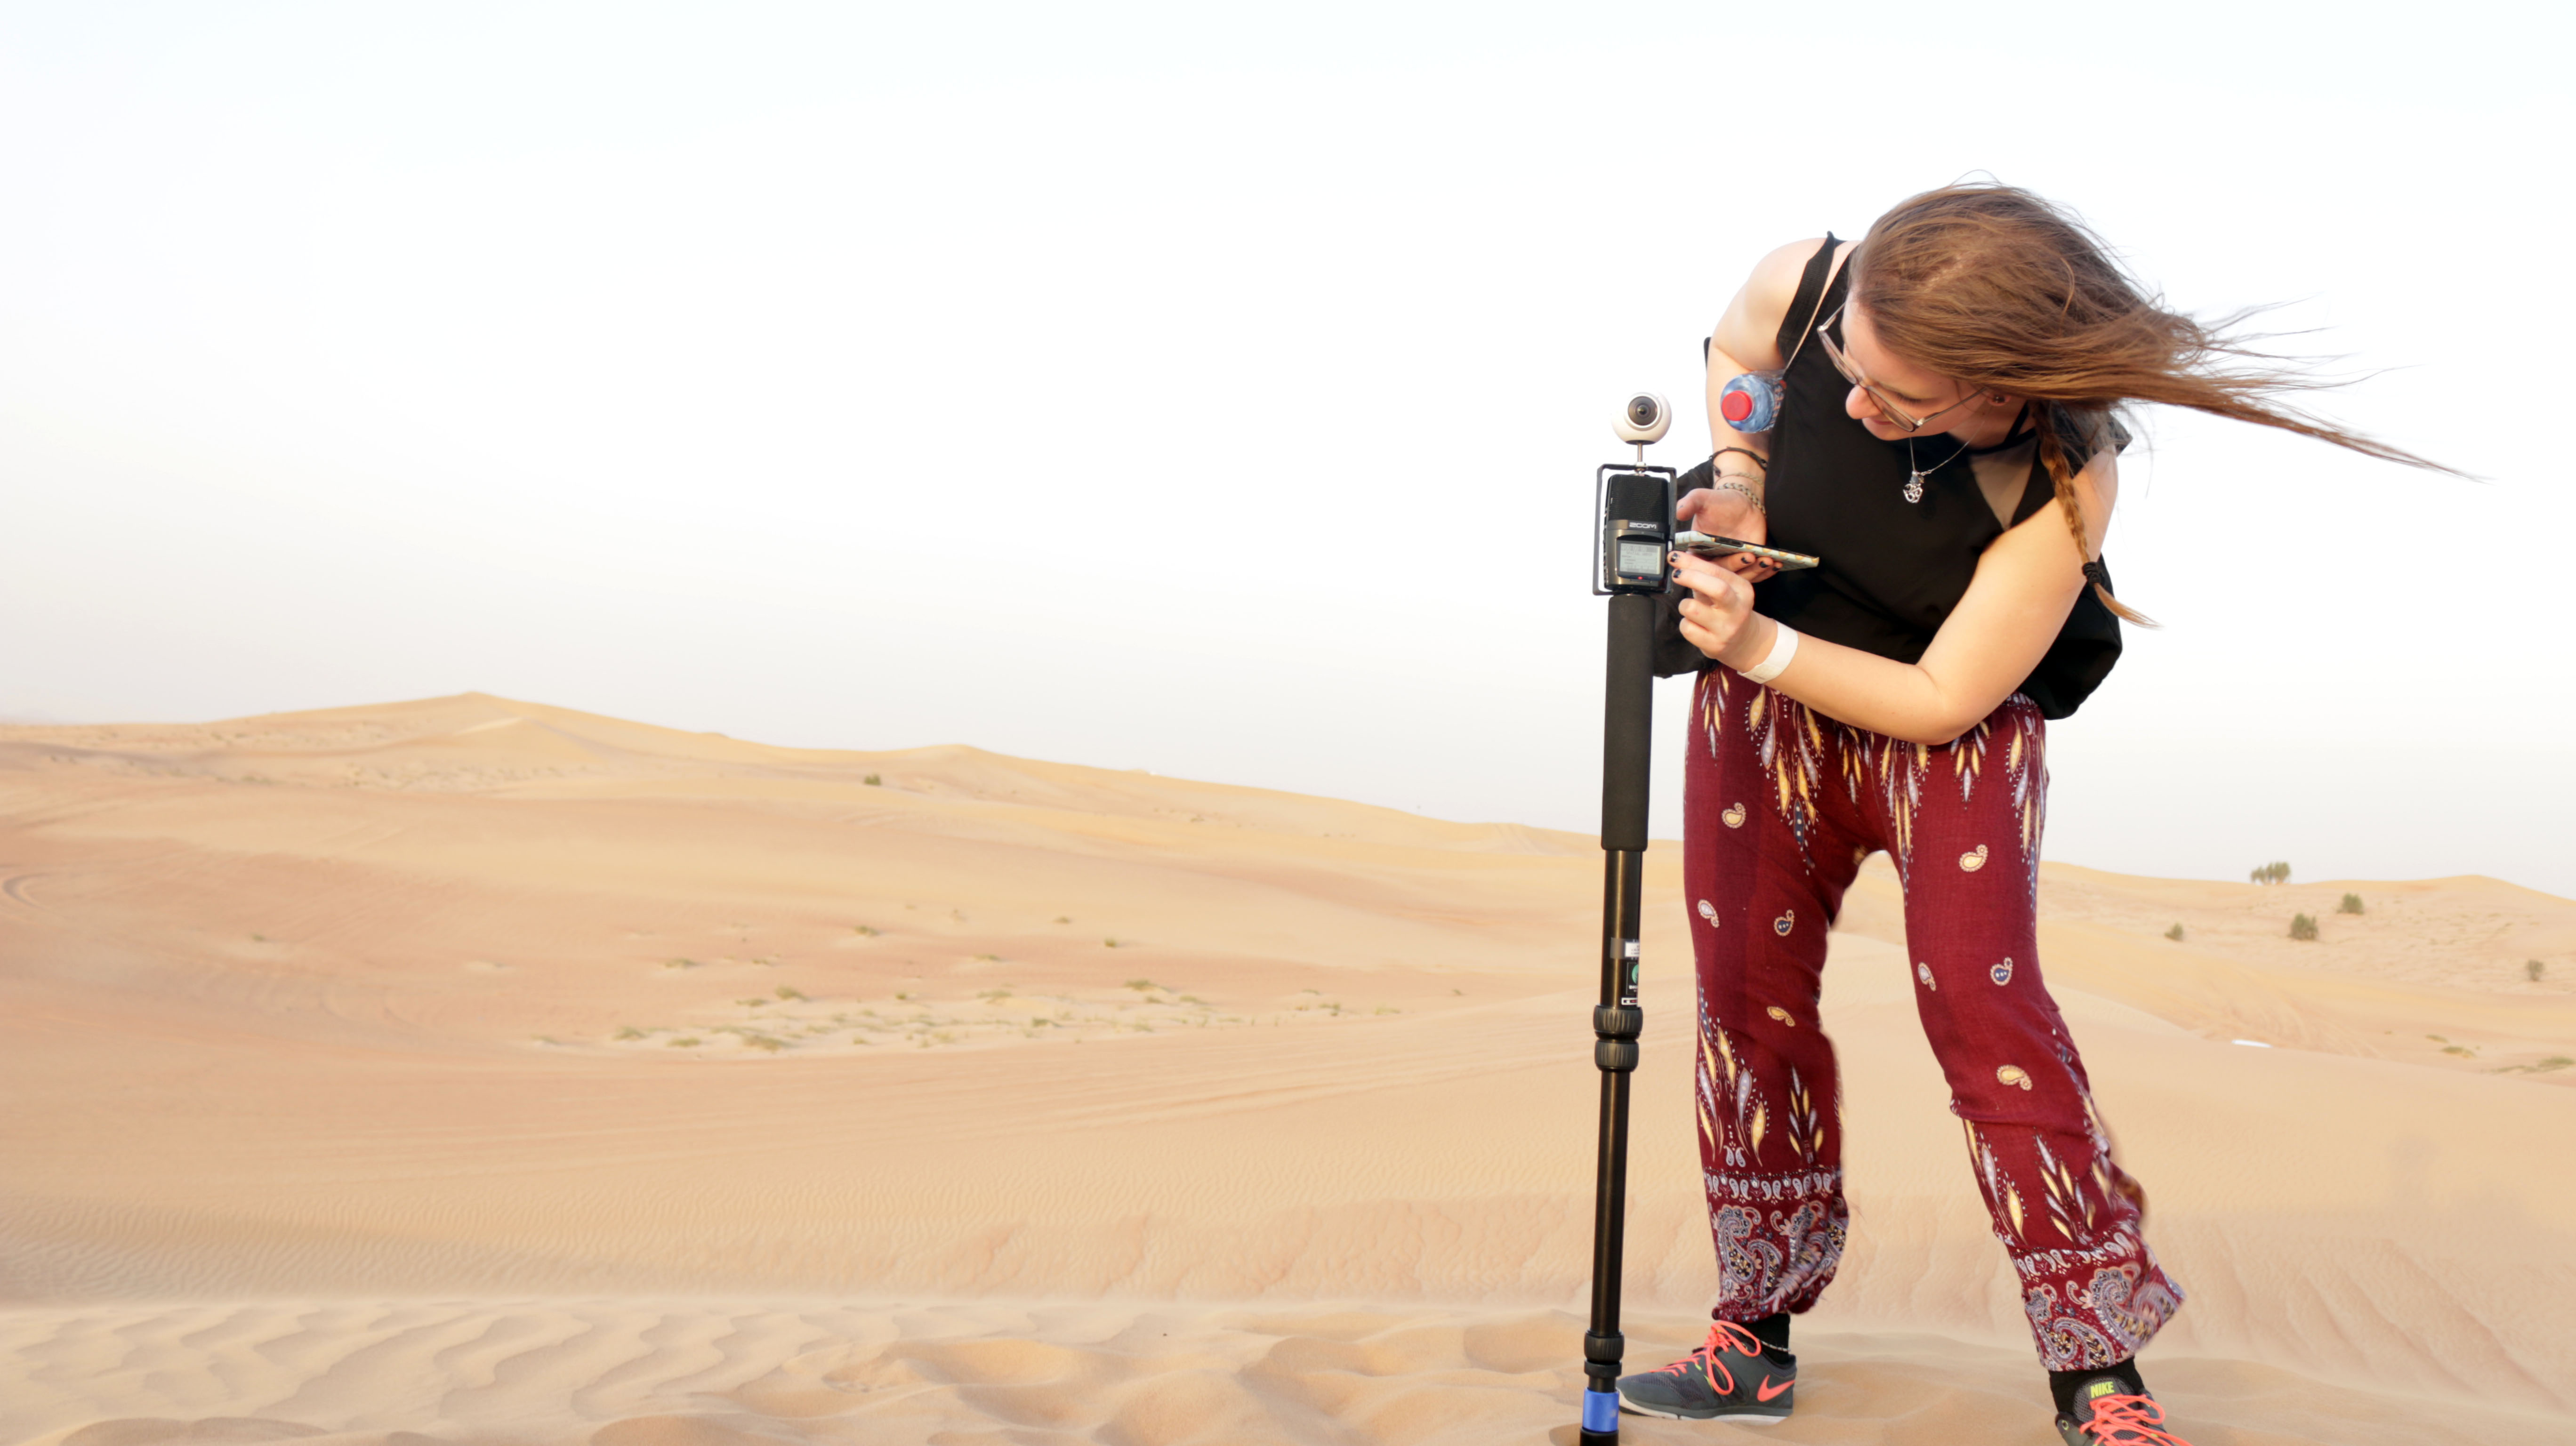 Photo courtesy of Anna Dining, who is pictured working on the RIT 360 Project in Dubai.